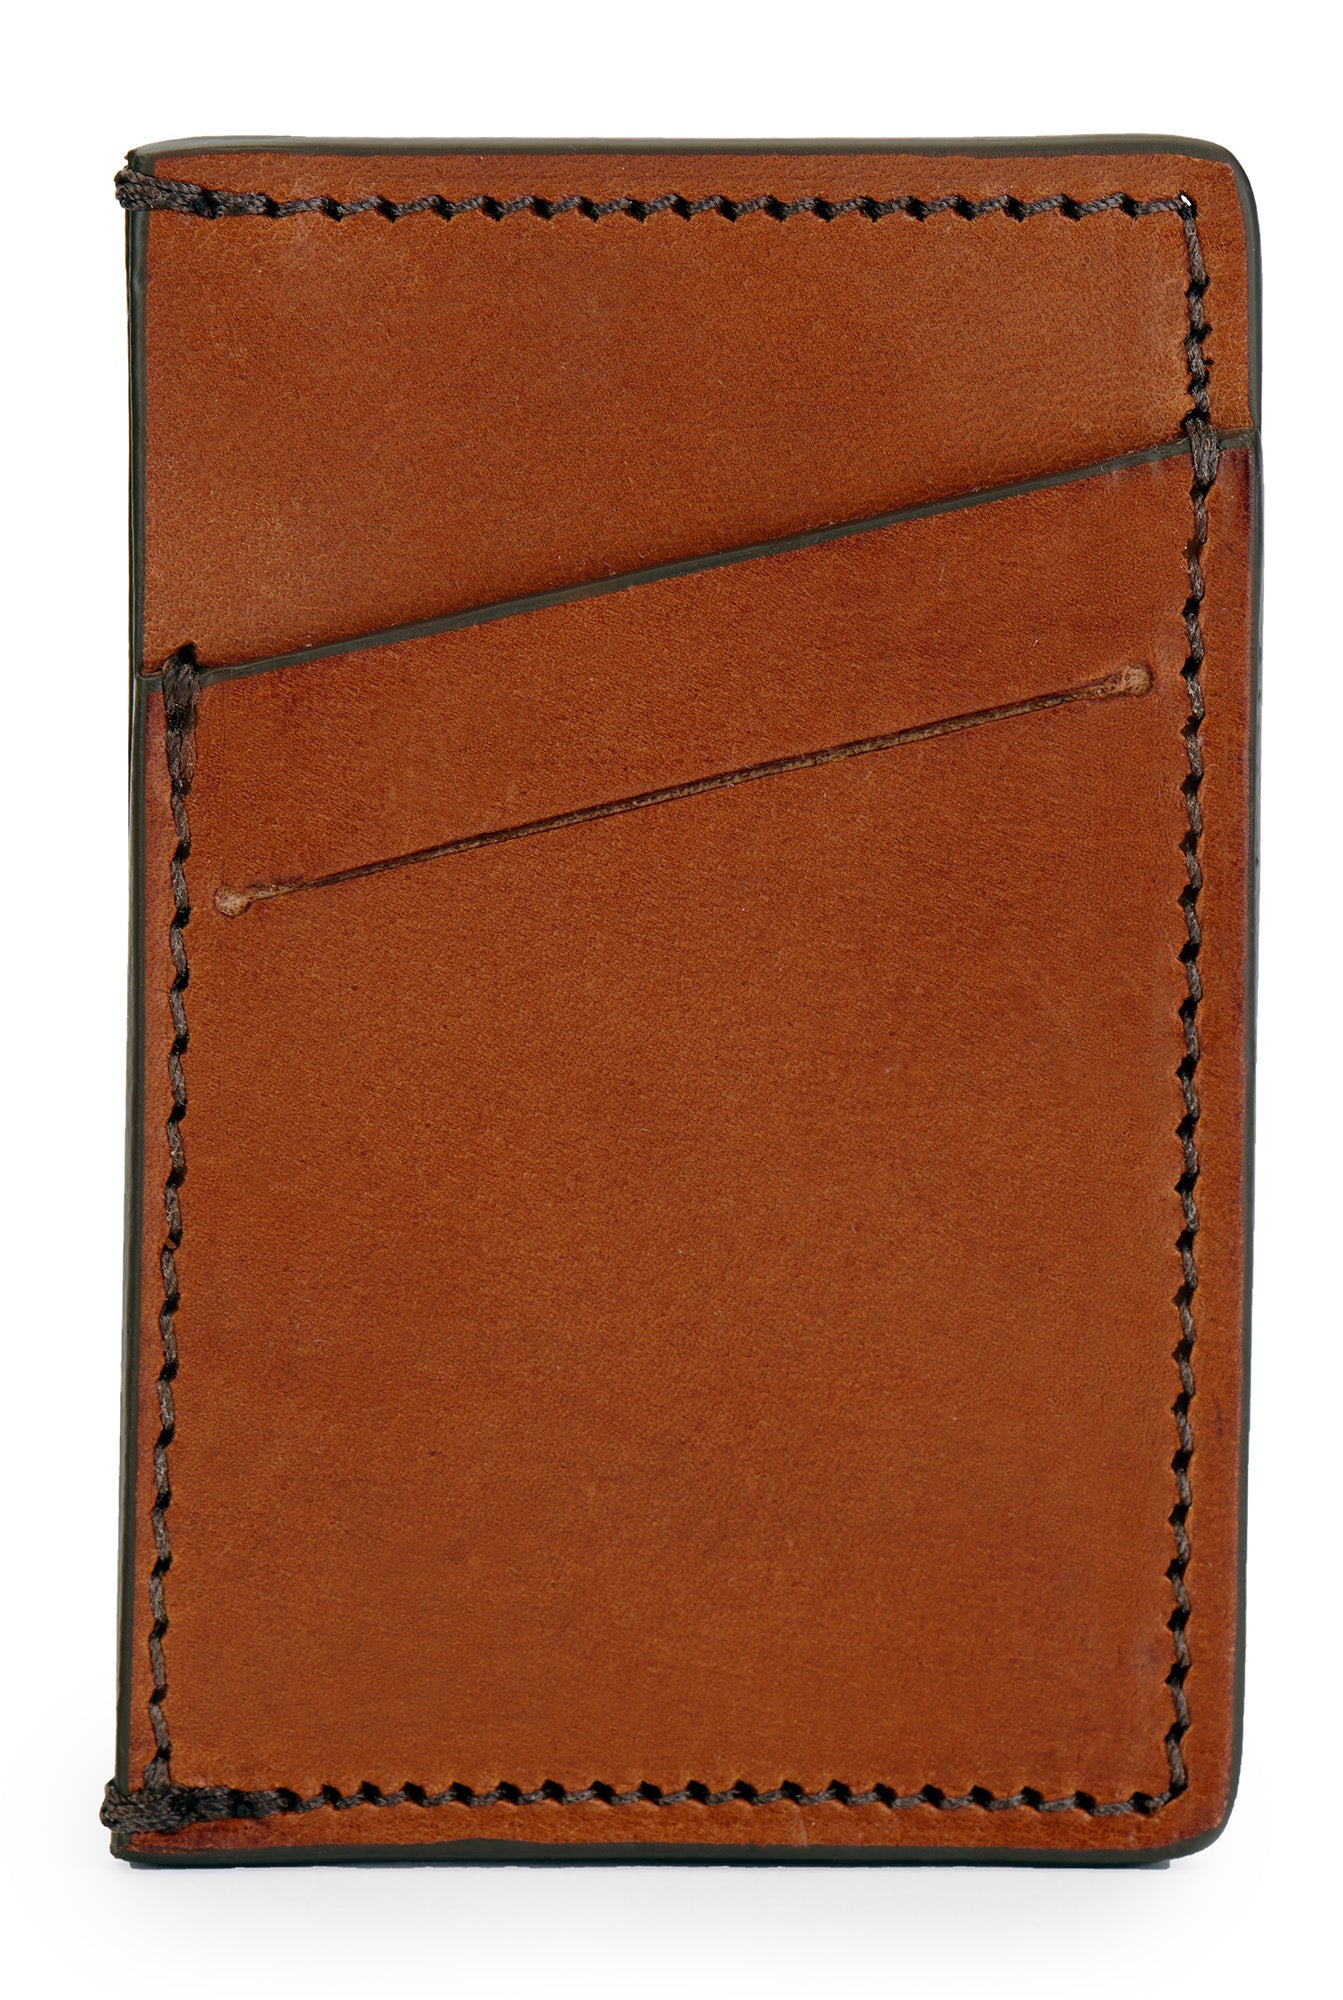 full grain leather minimalist wallet front empty pictured in saddle tan